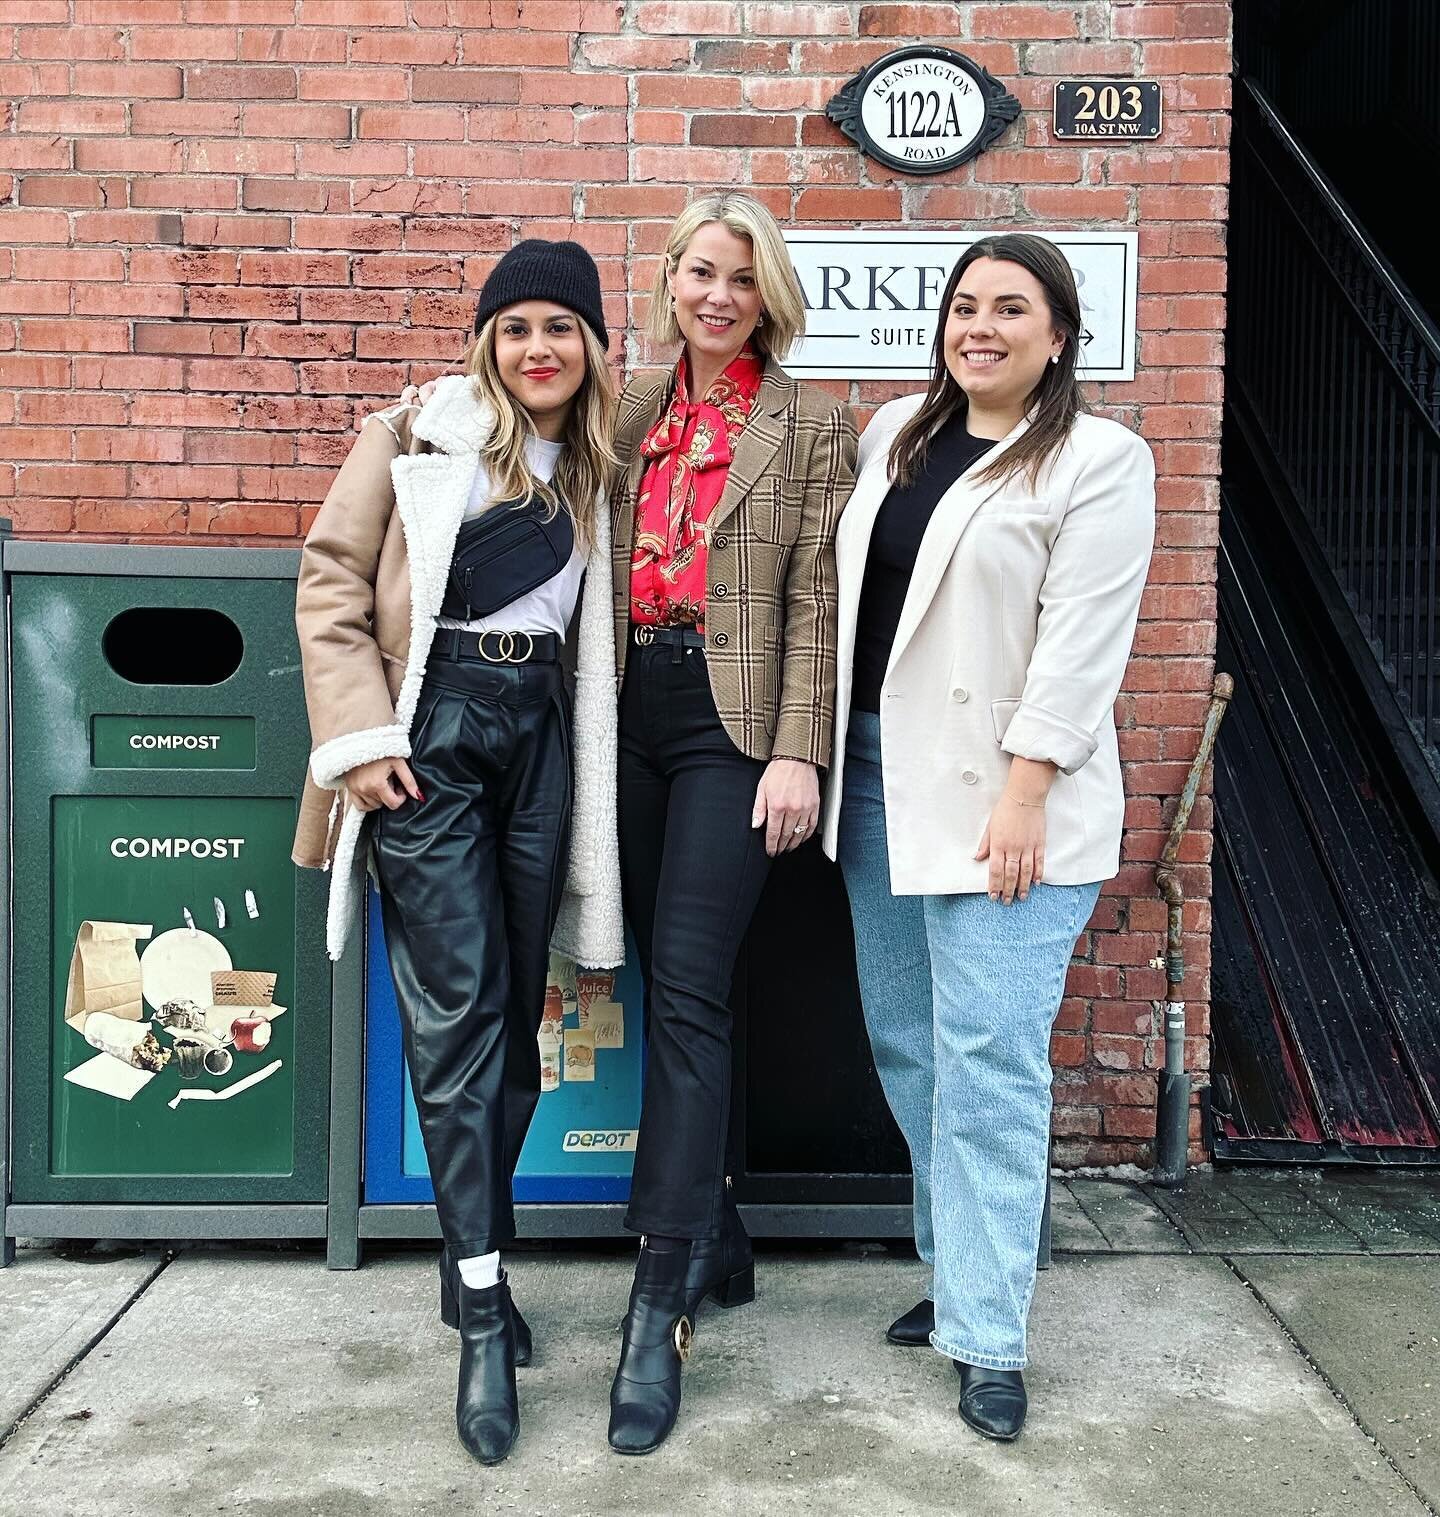 FASHION FRIDAY // Blazers and unplanned matching outfits apparently means a sign of unity, thoughtfulness and even love! Today and always I&rsquo;m grateful for the bonds I&rsquo;ve made with my amazing team and the friendships I see them creating wi